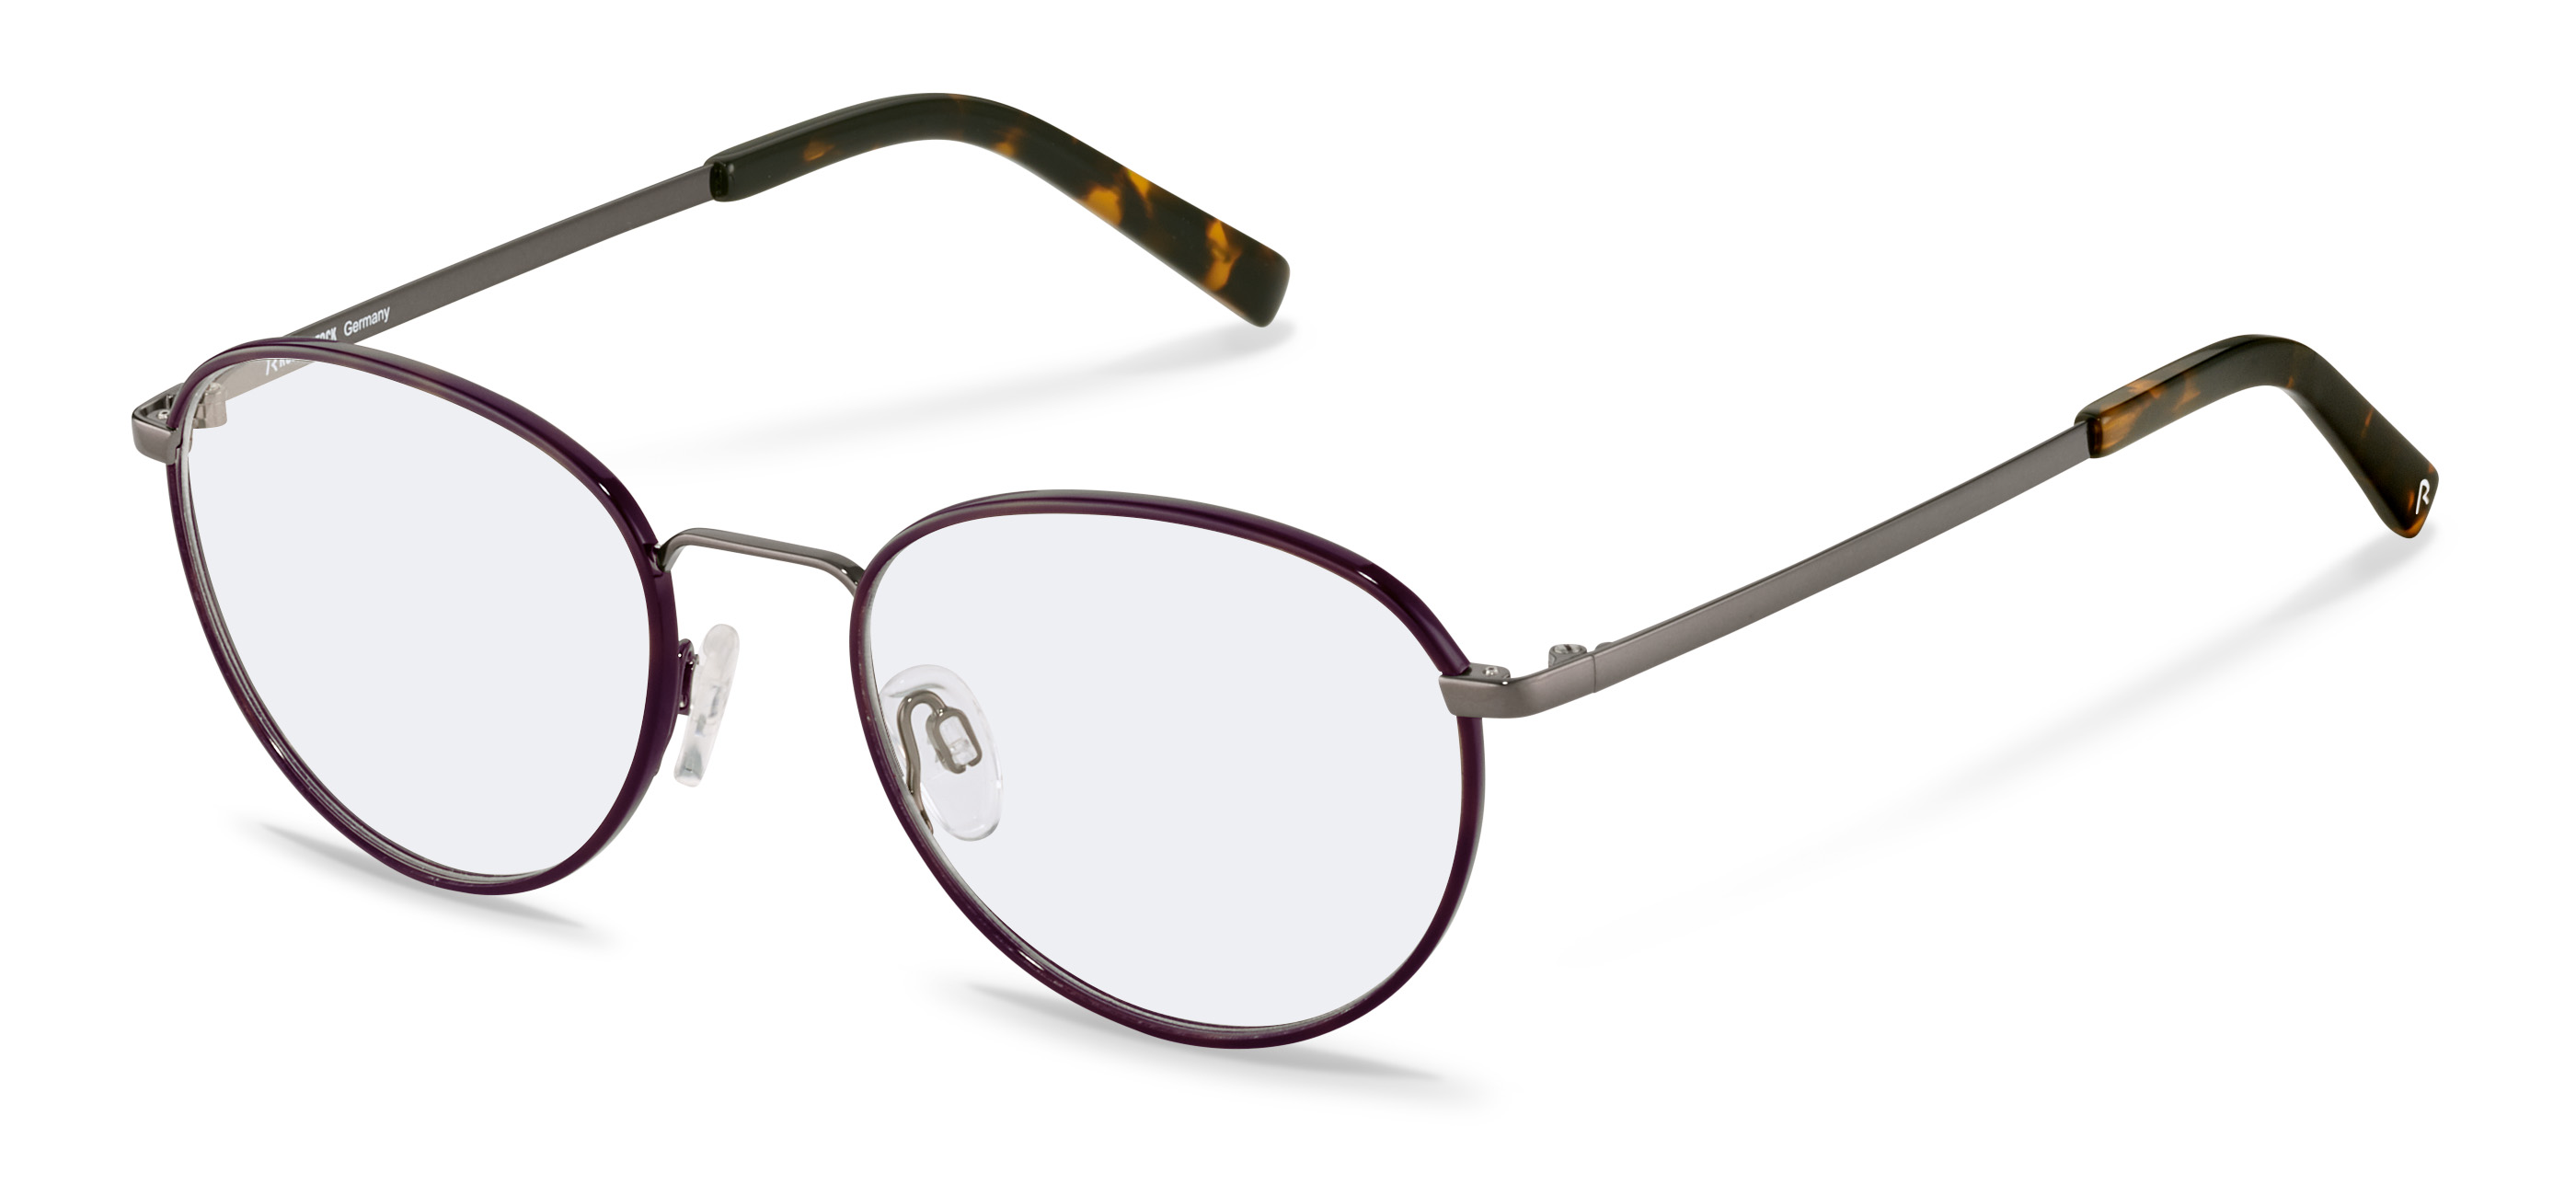 Rodenstock-Dioptrické okuliare-R2656-greystructured/silver